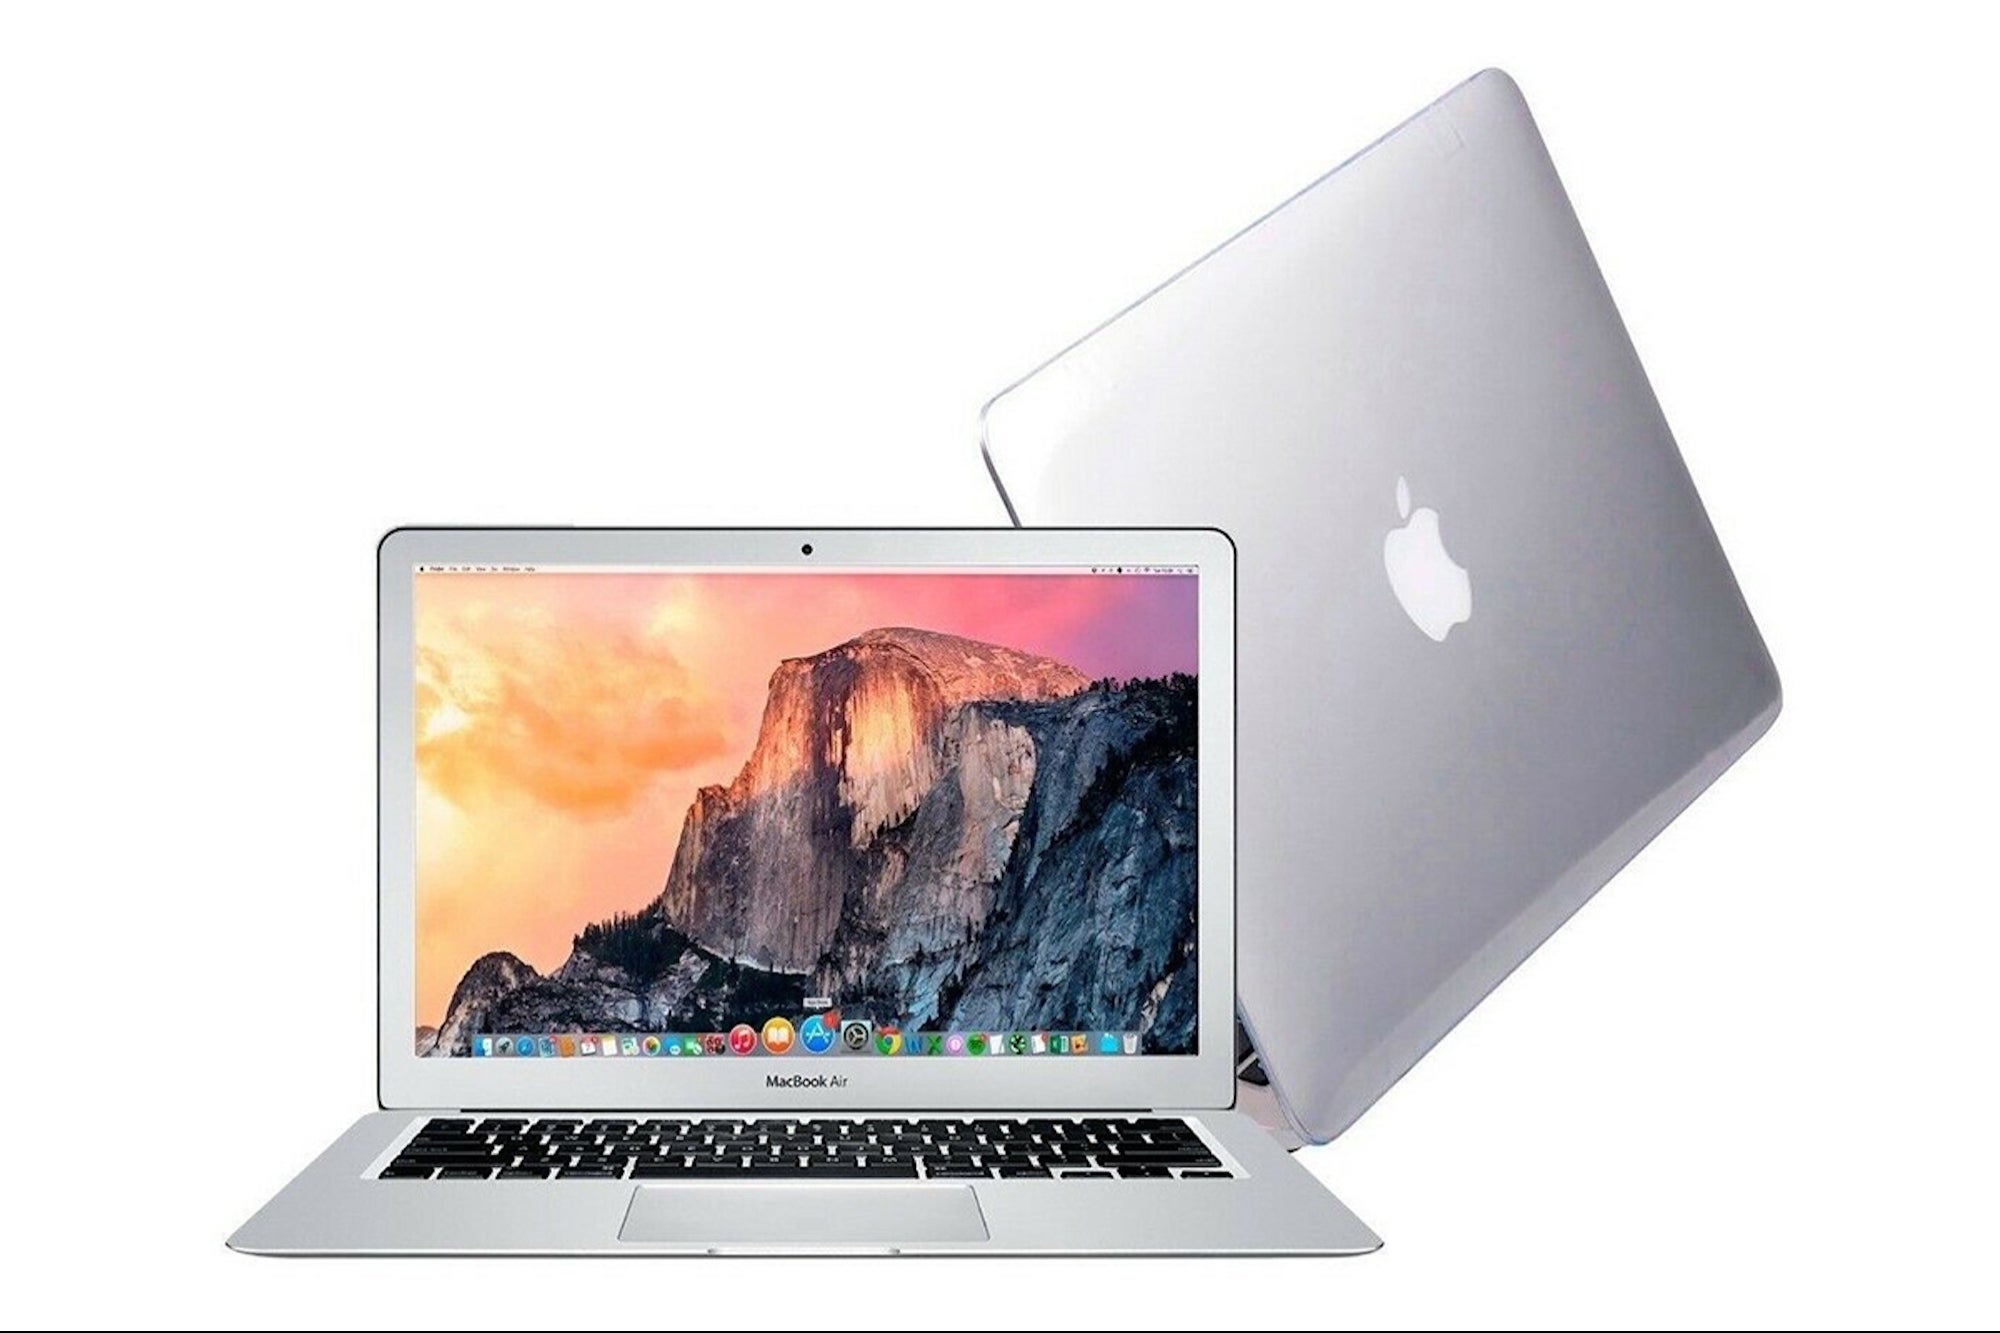 Save 65% on a Near-Mint Condition Refurbished MacBook Air